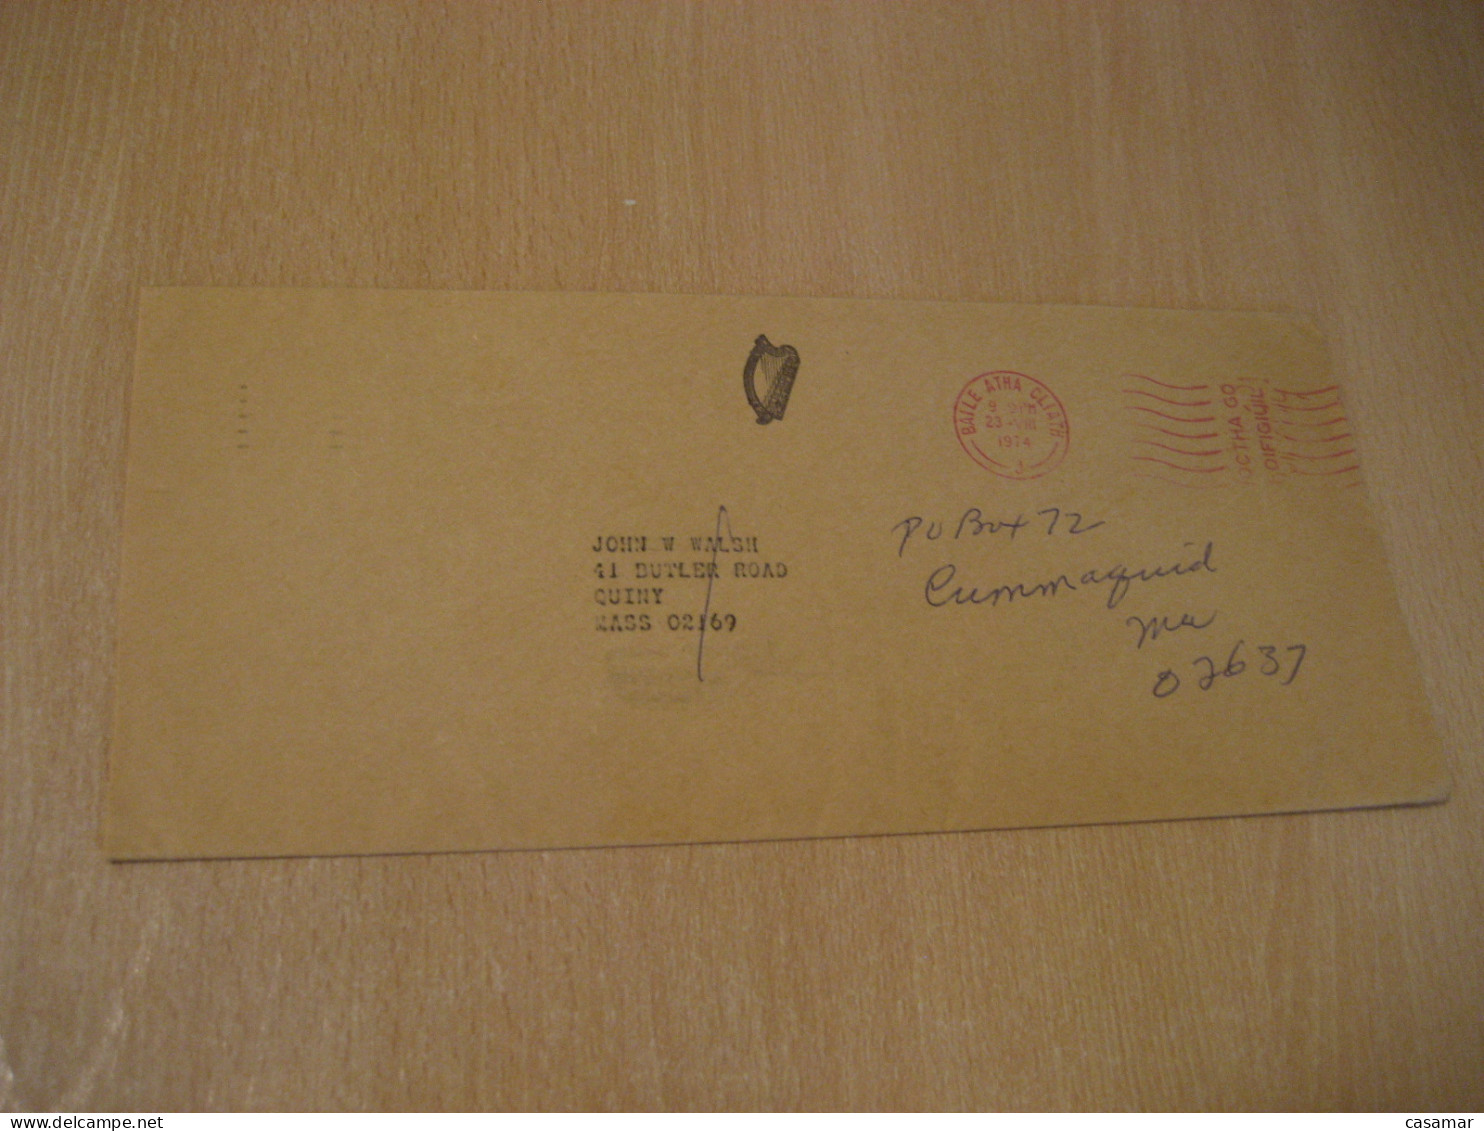 DUBLIN 1974 To Quiny Cummmaquid USA Air Meter Mail Cancel Cover IRELAND Eire - Covers & Documents